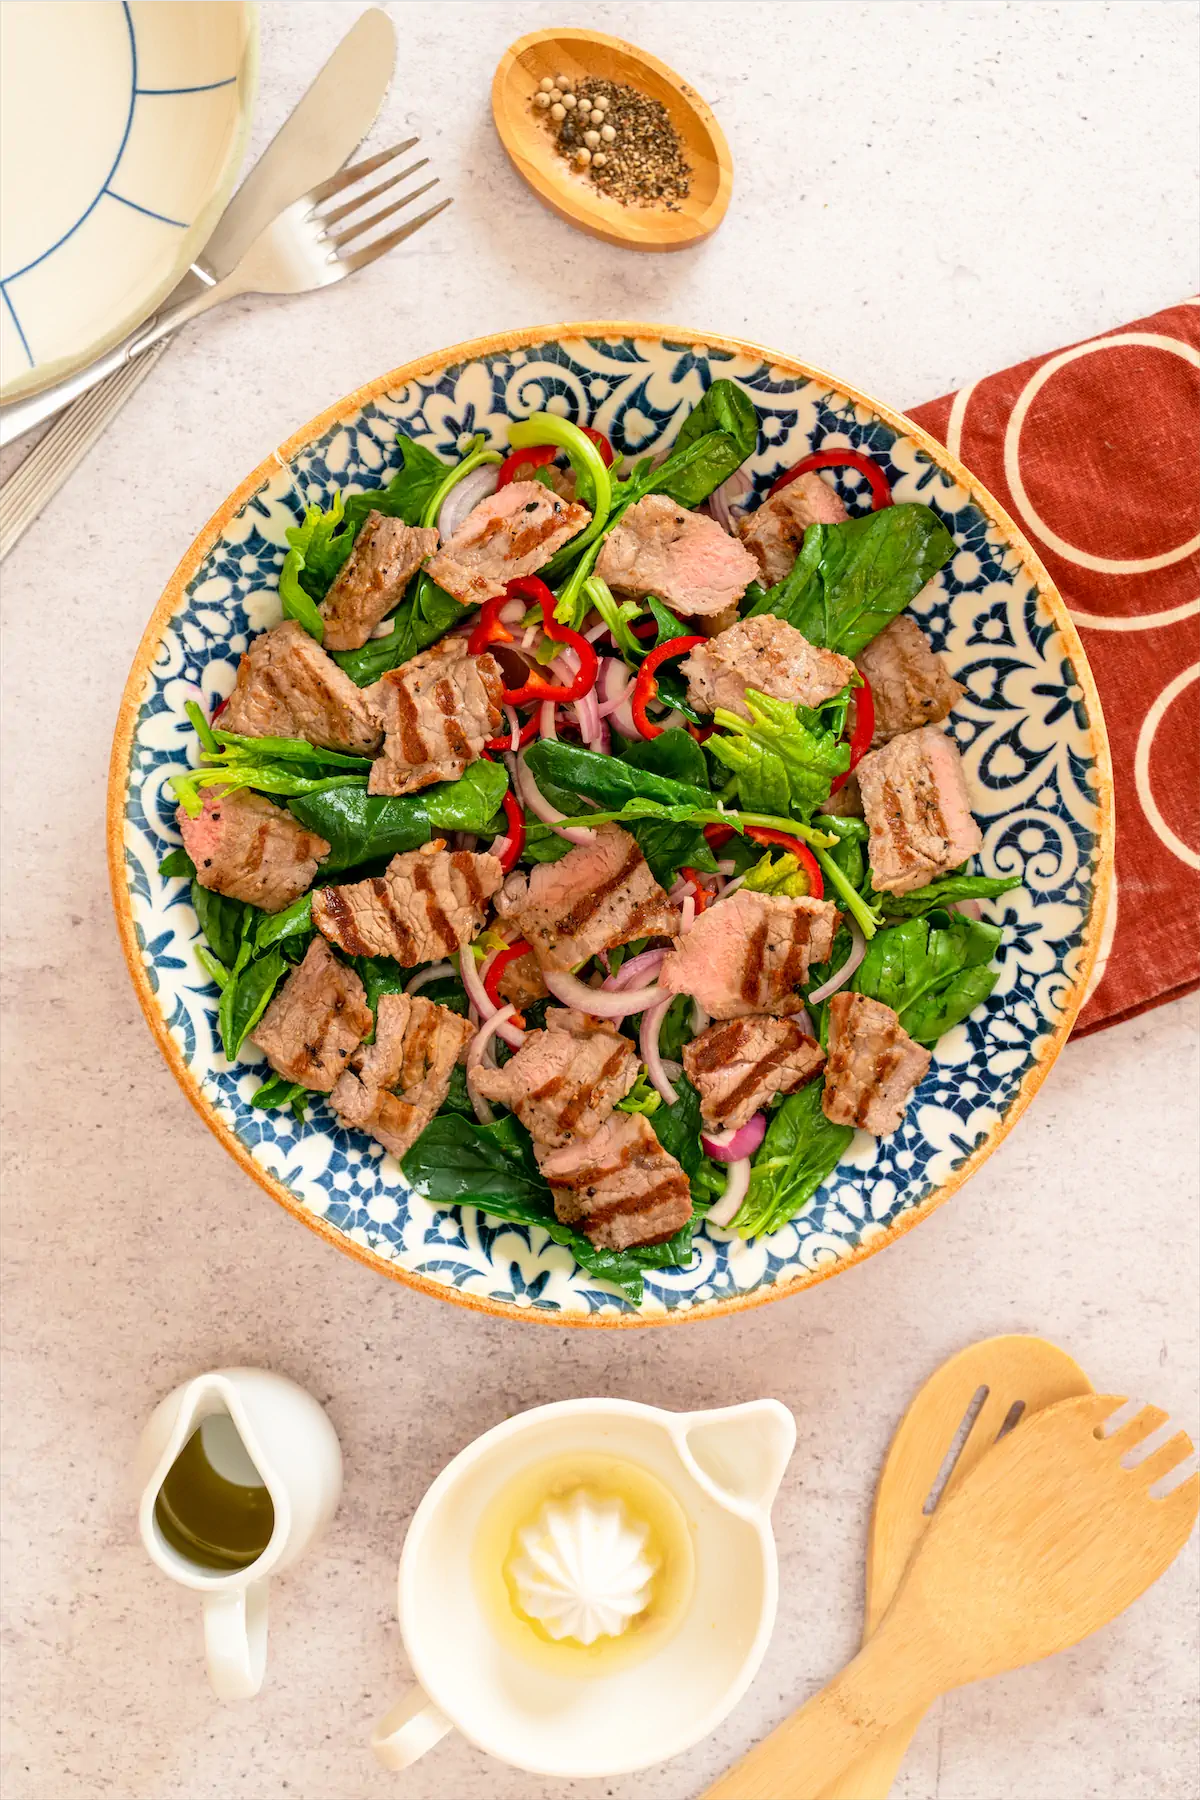 Salad containing steak, bell peppers, onions, spinach, olive oil.